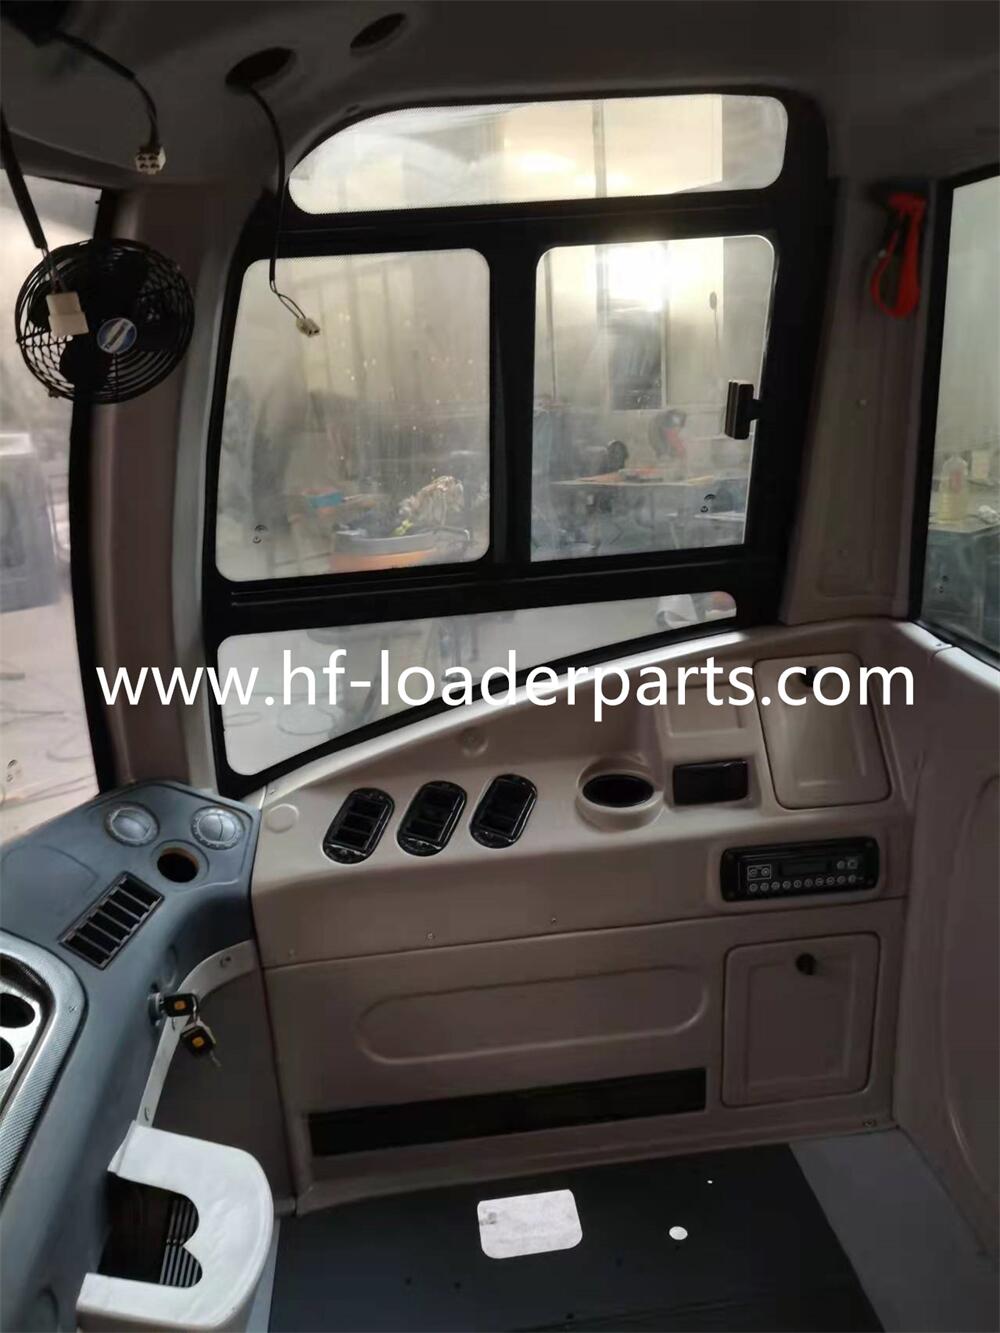 Loader Cab for Yutong 959H 956H 936H 966H